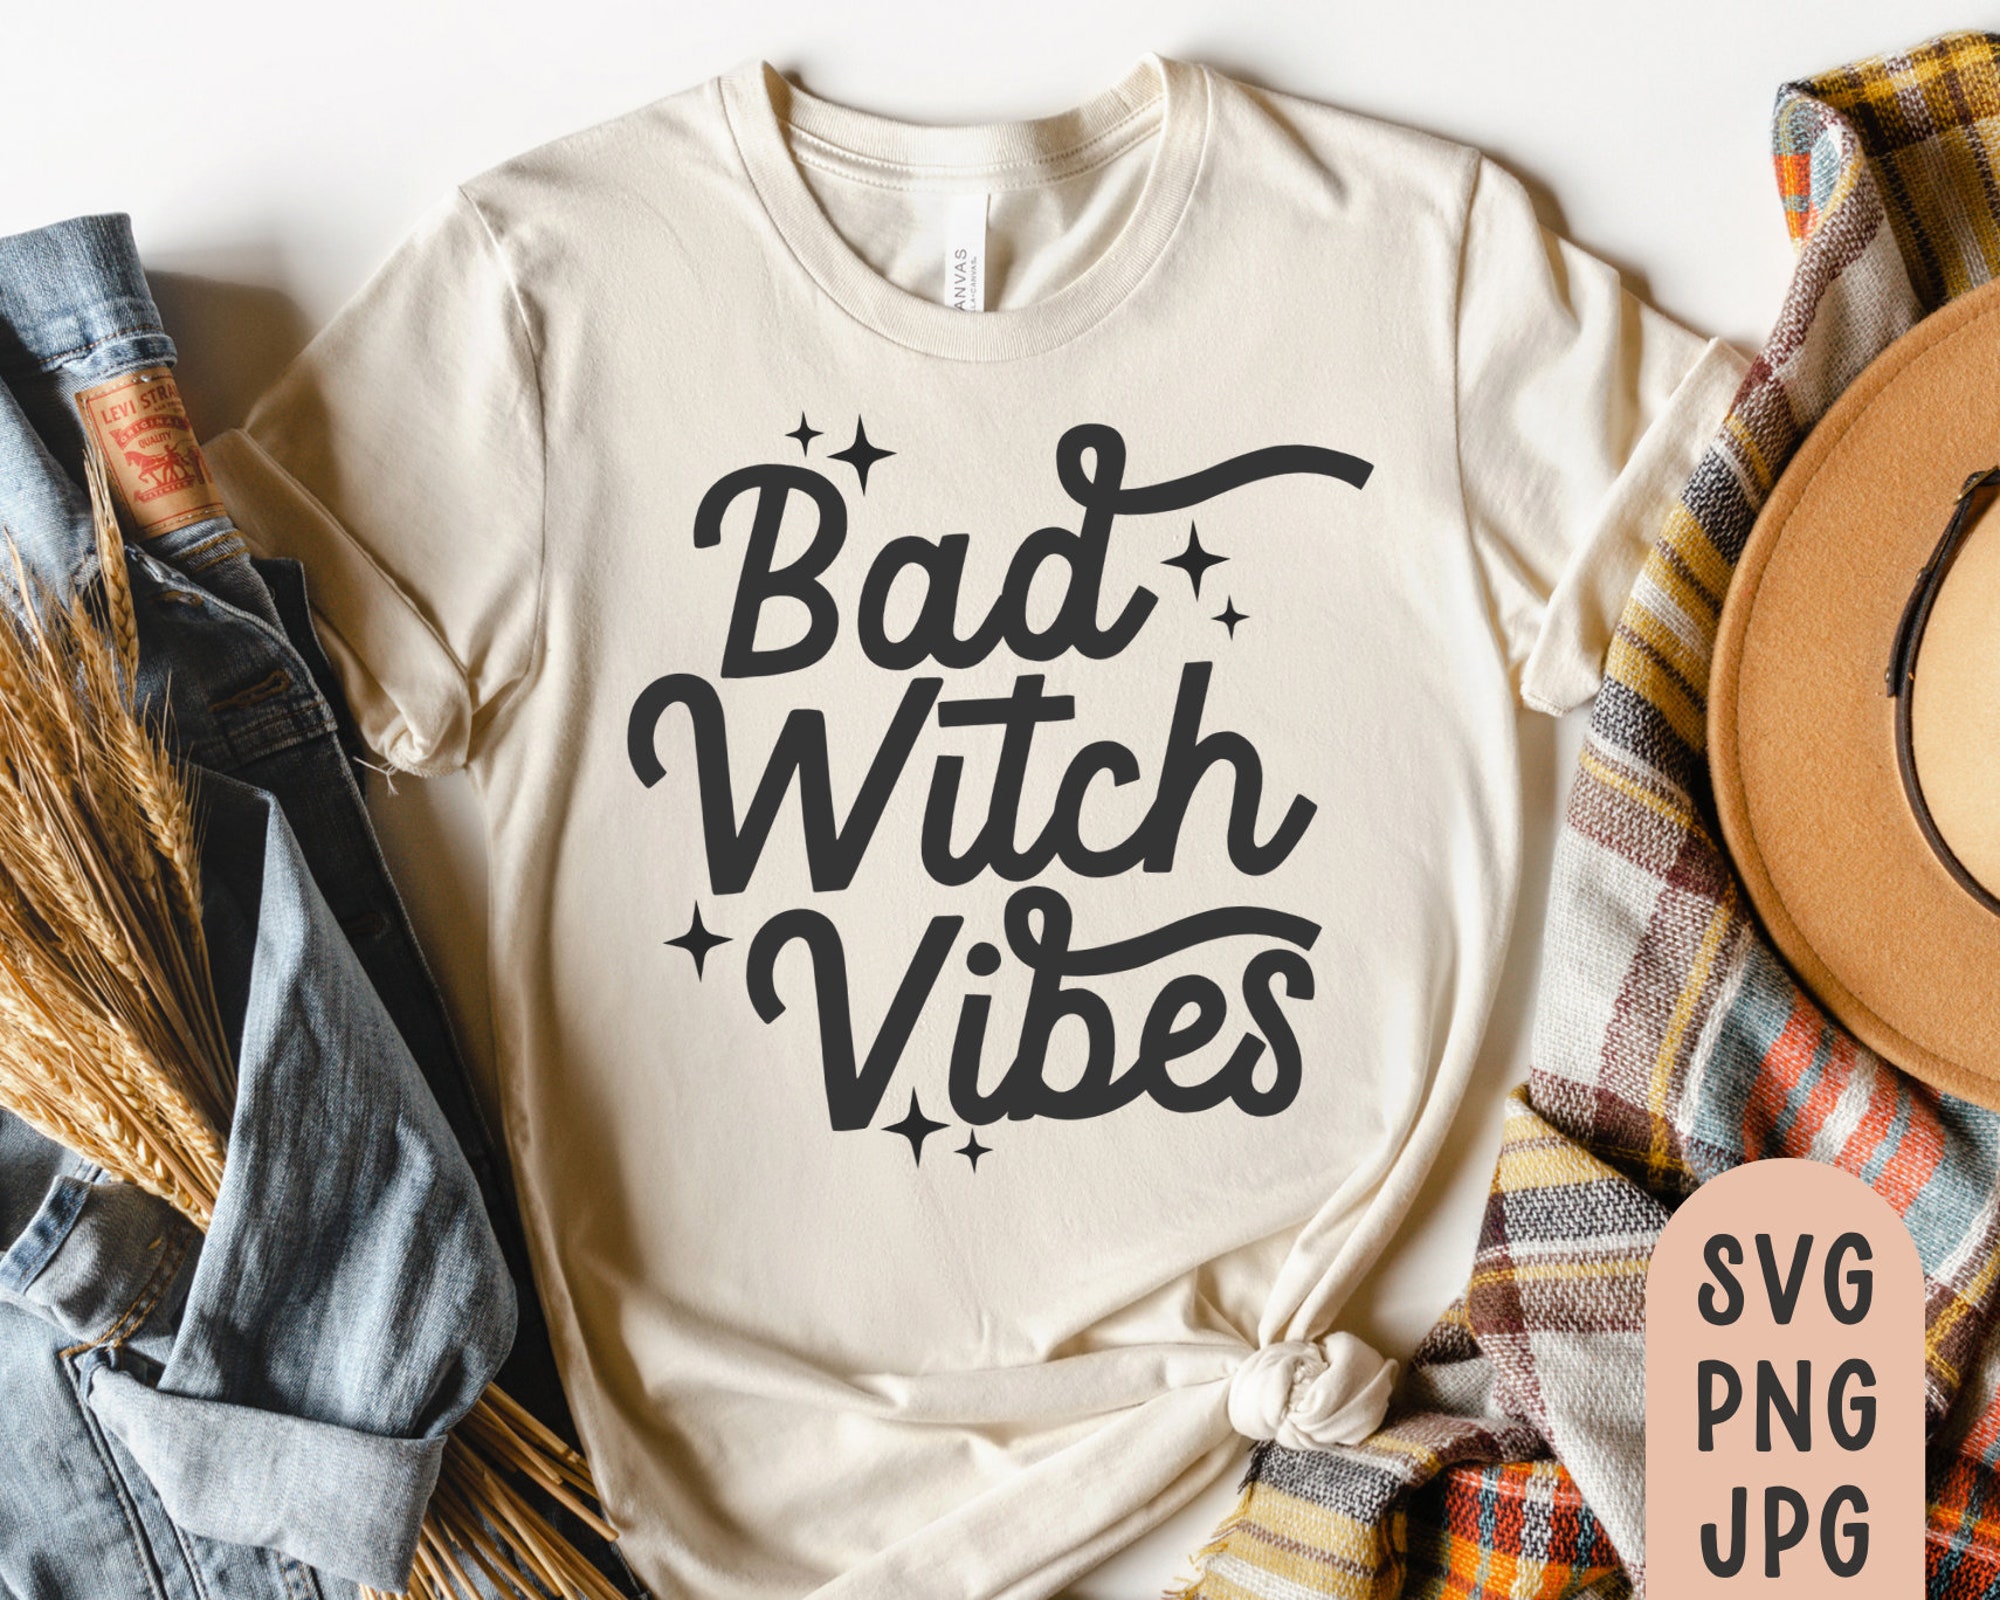 Bad Witch Vibes Svg, Witch Svg, Halloween Svg, Fall Svg, Autumn Svg, Bad Witch Club